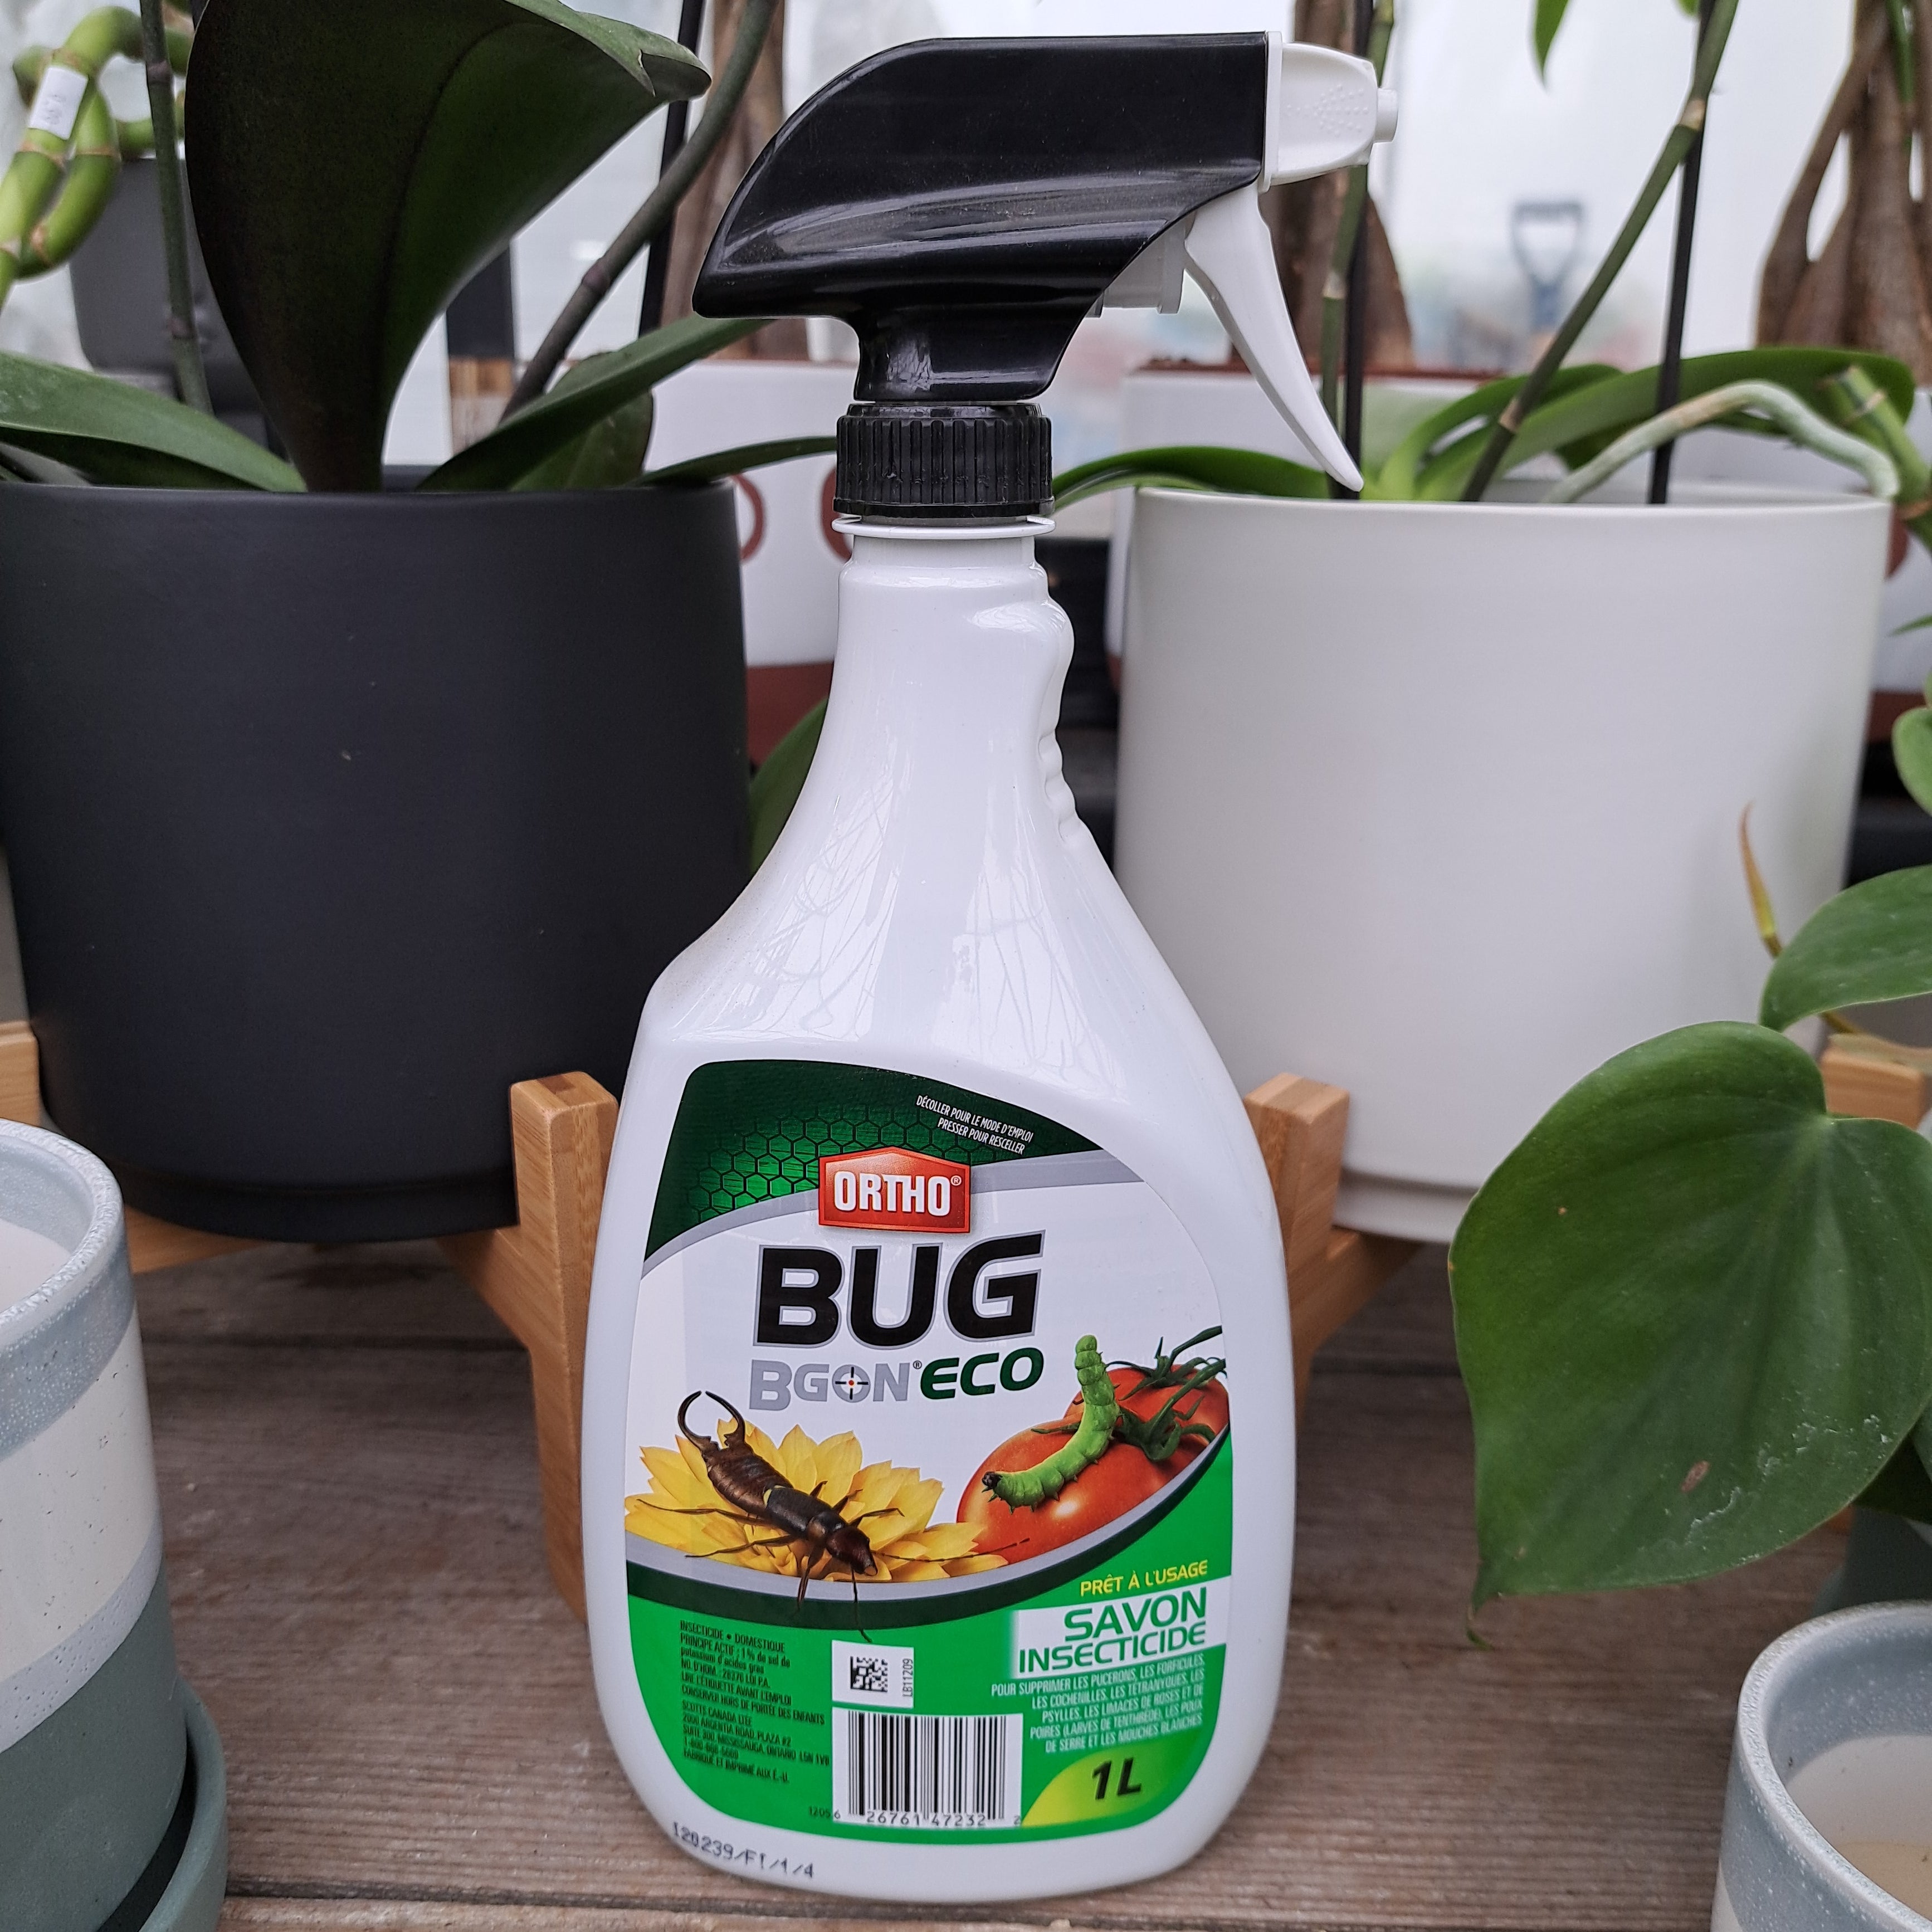 Bug bgon Insecticide Soap